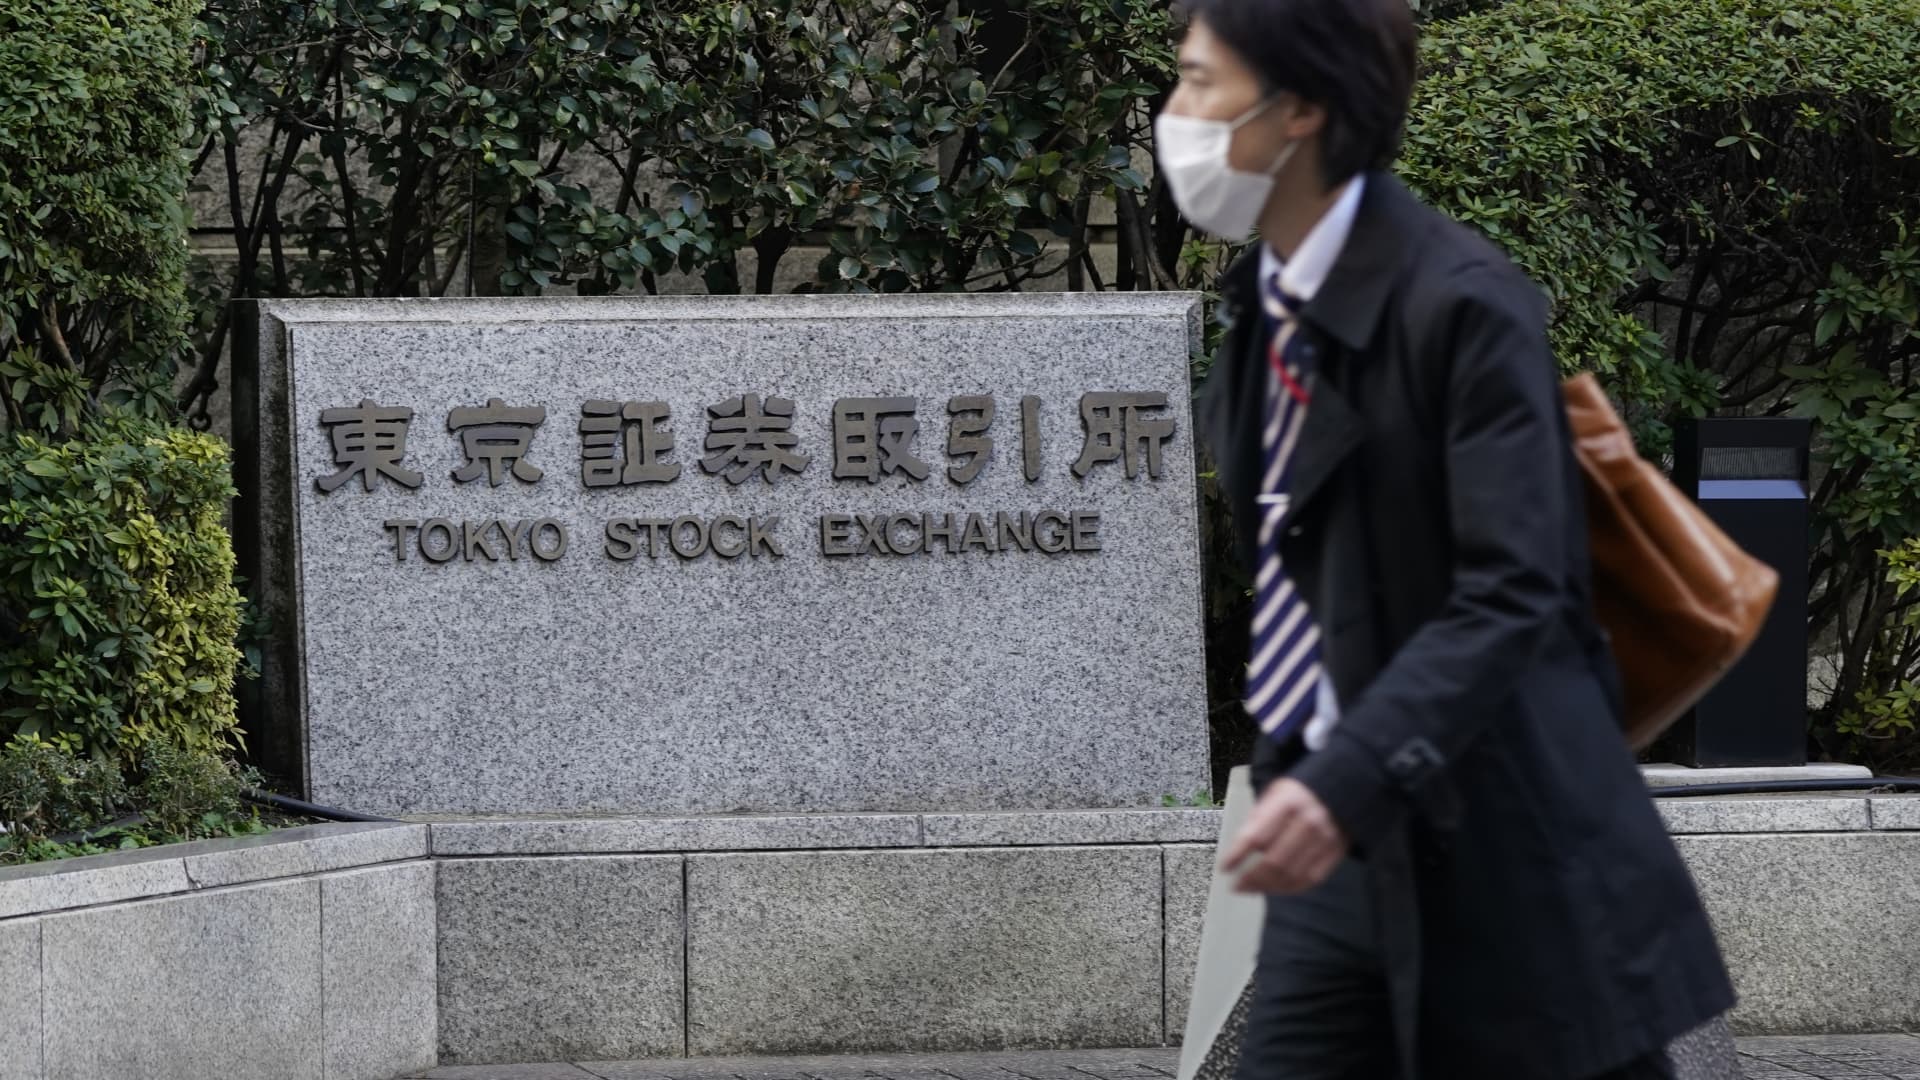 Japan’s Nikkei leads losses in mixed Asia markets; SoftBank shares drop 6% after earnings losses – CNBC